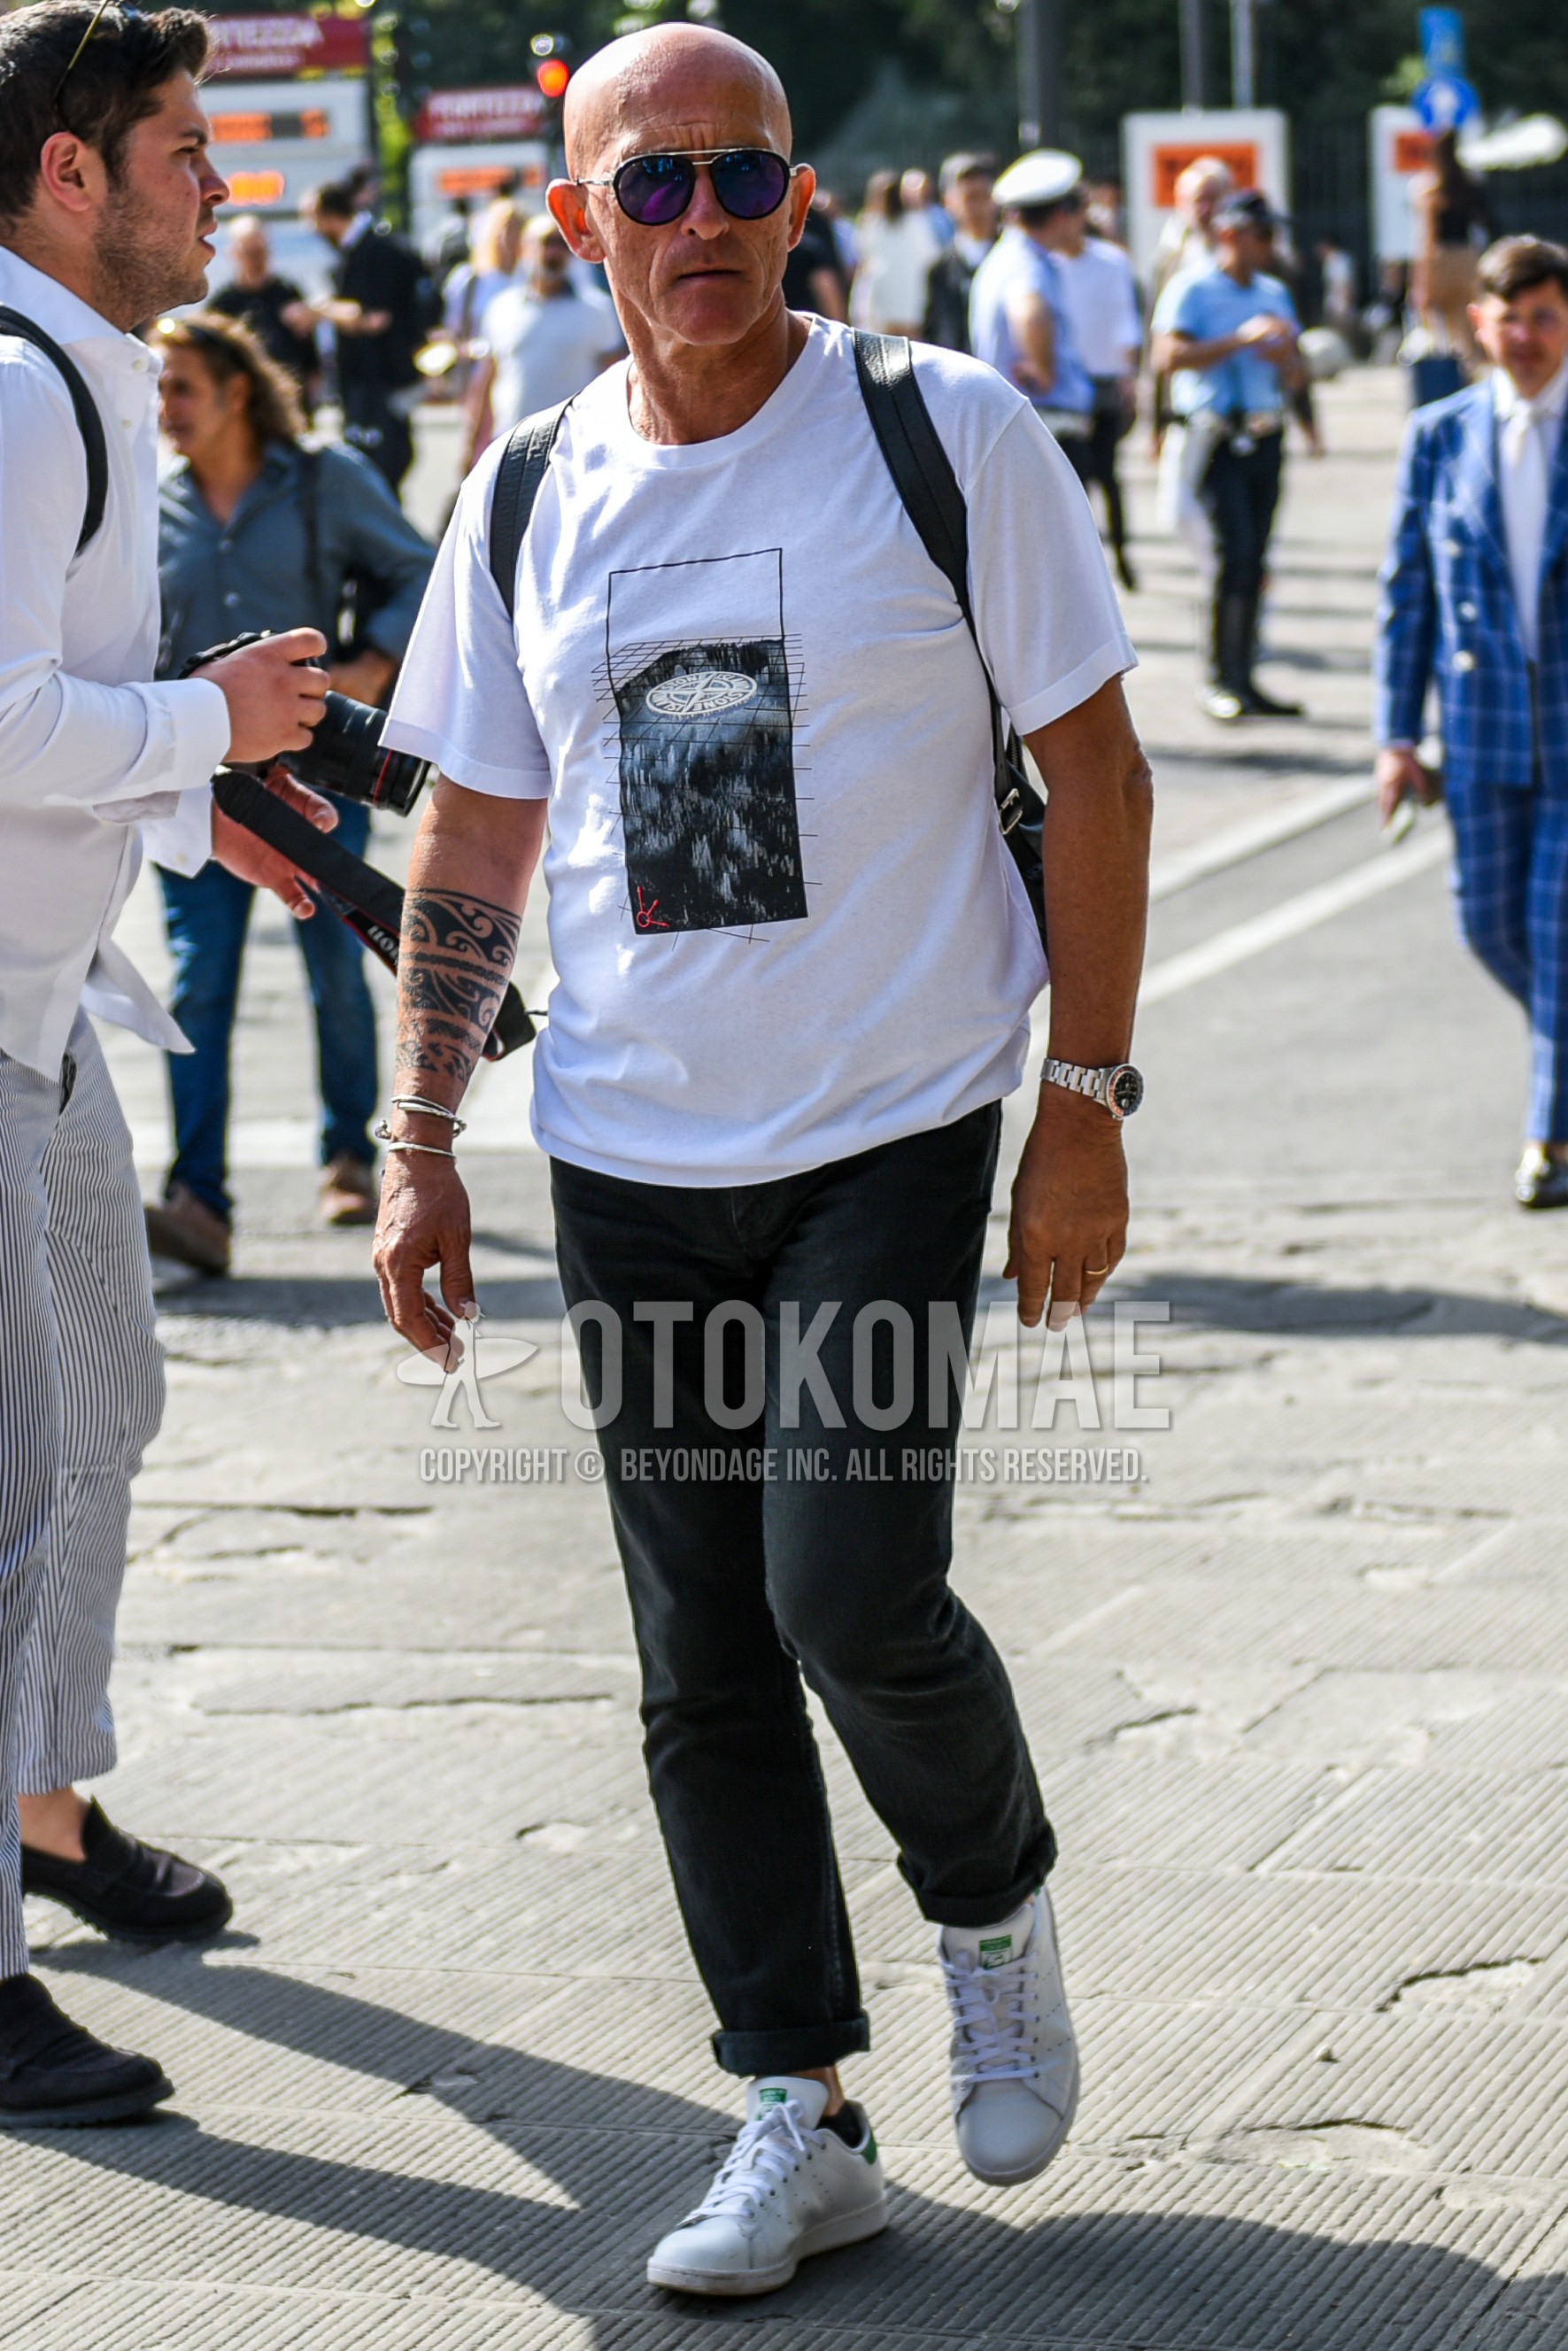 Men's summer outfit with silver plain sunglasses, white graphic t-shirt, dark gray plain cotton pants, white low-cut sneakers.